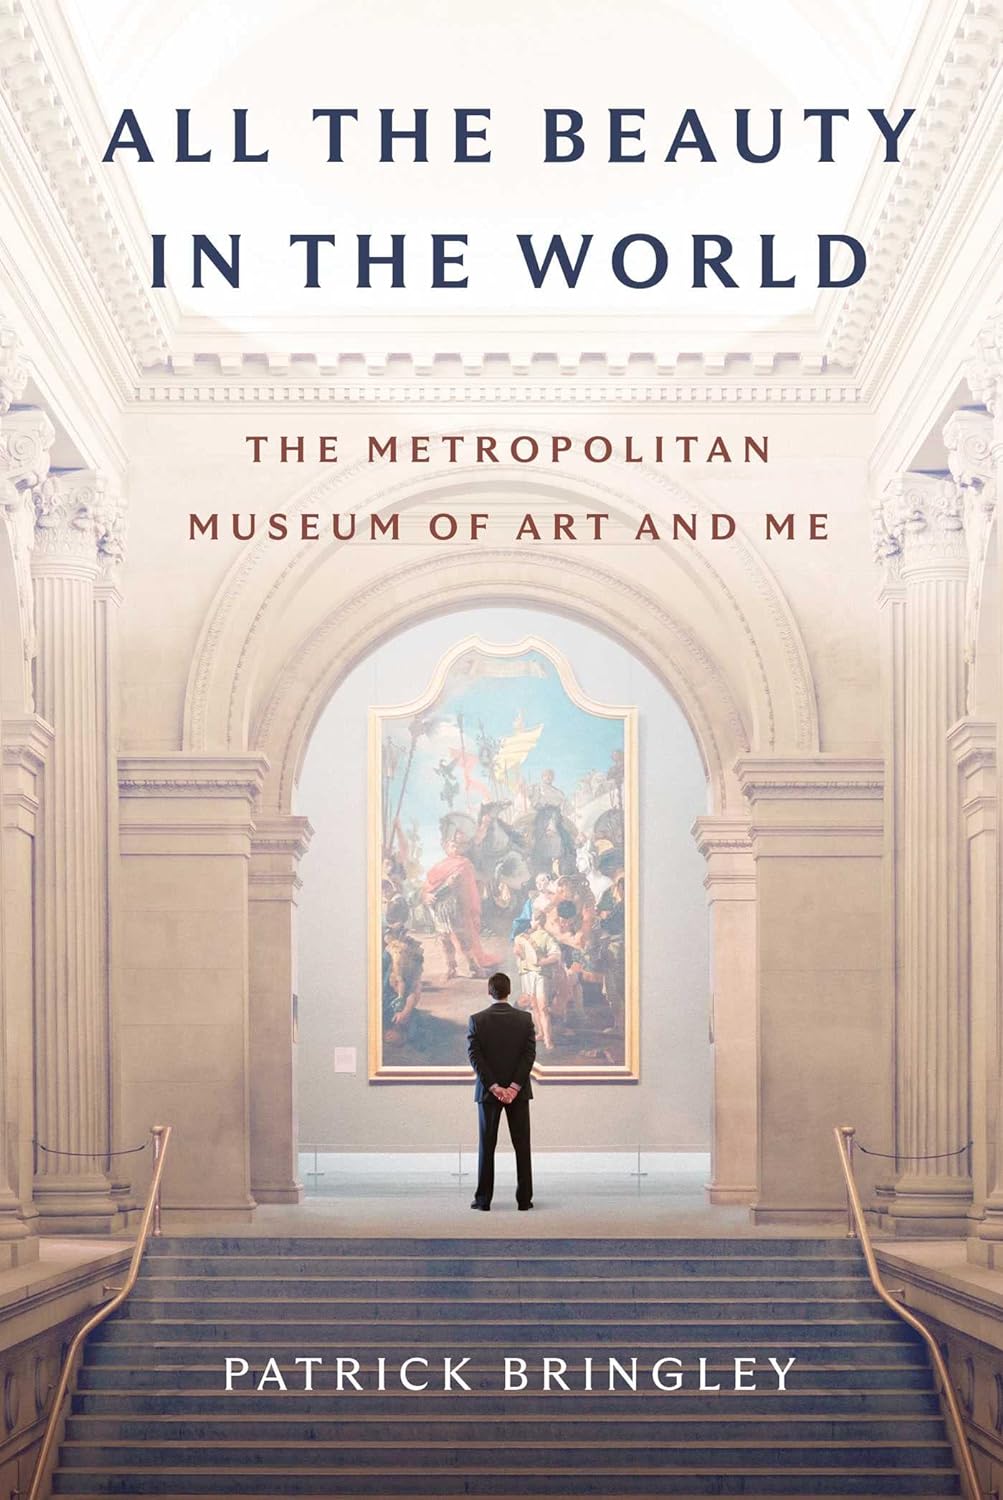 Image for "All the Beauty in the World: The Metropolitan Museum of Art and Me"